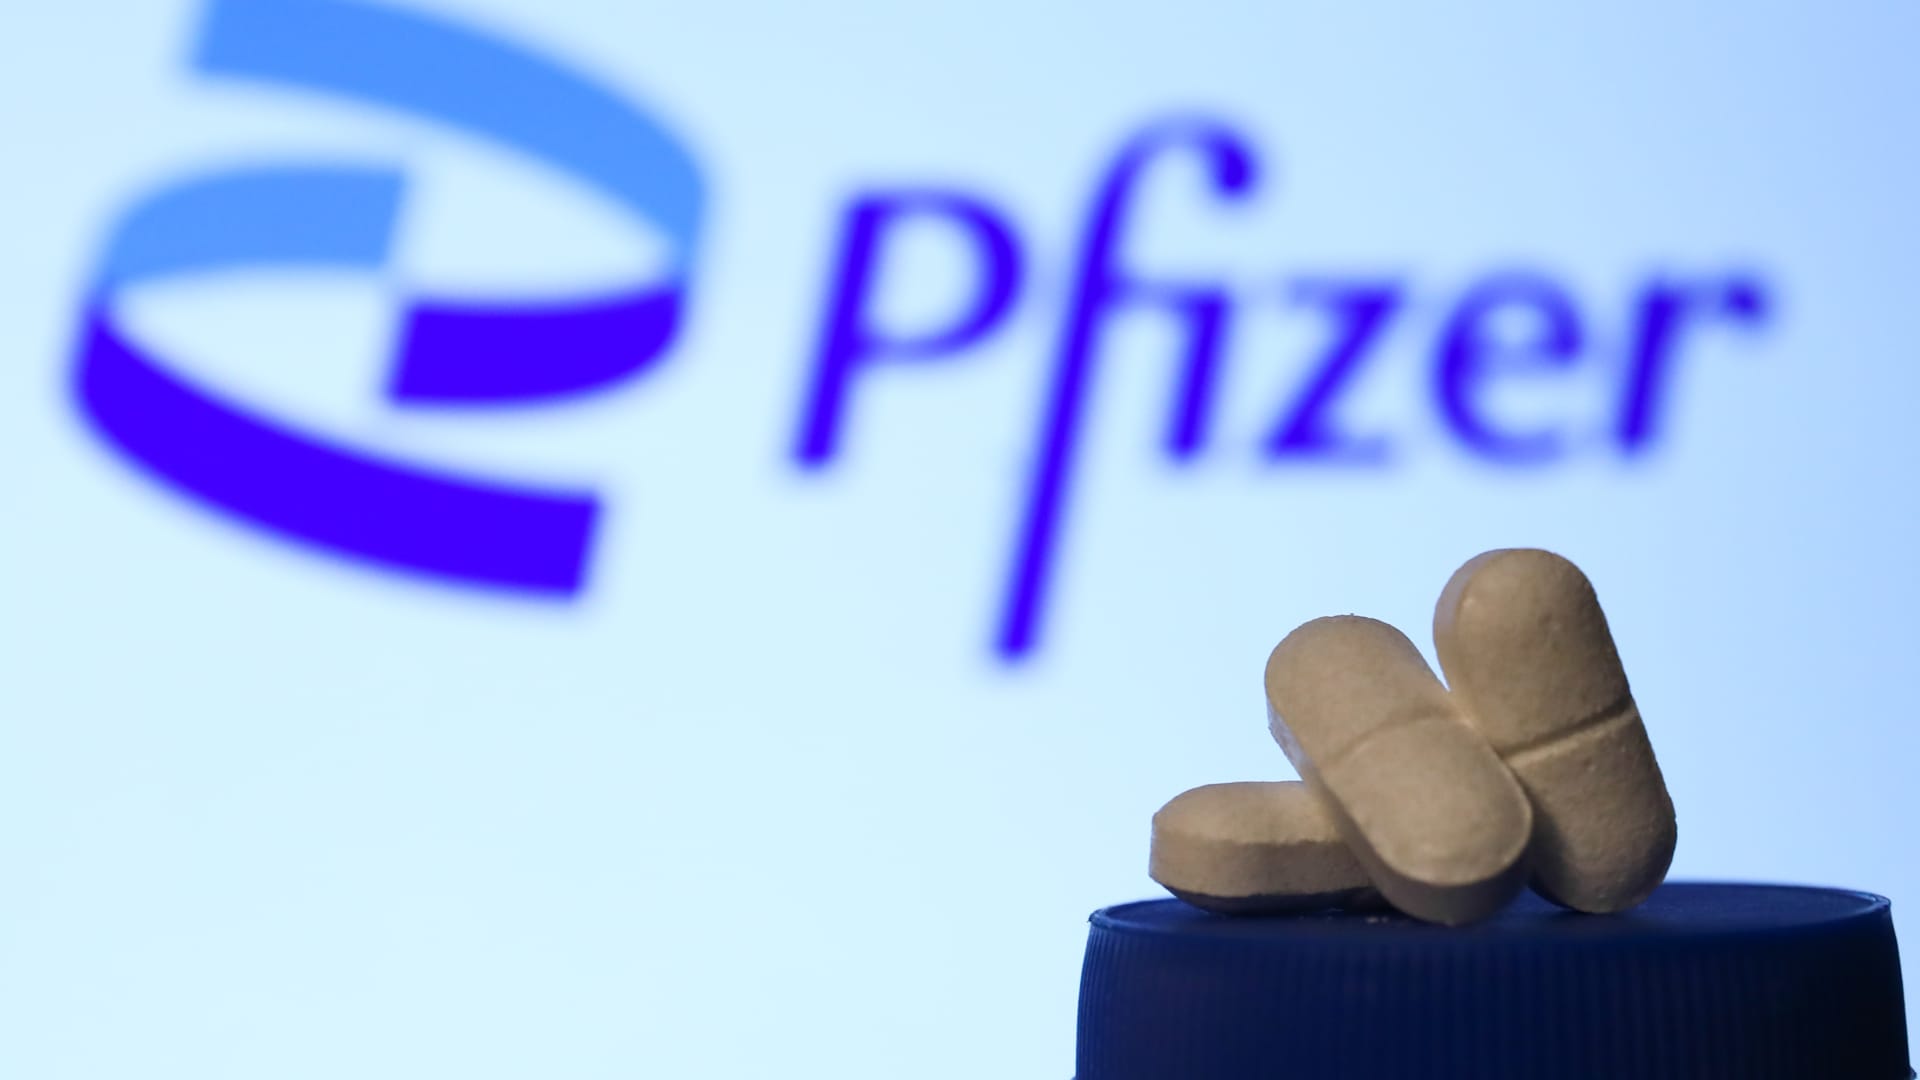 Pfizer is betting big on cancer drugs to turn business around after Covid decline – here’s what to know